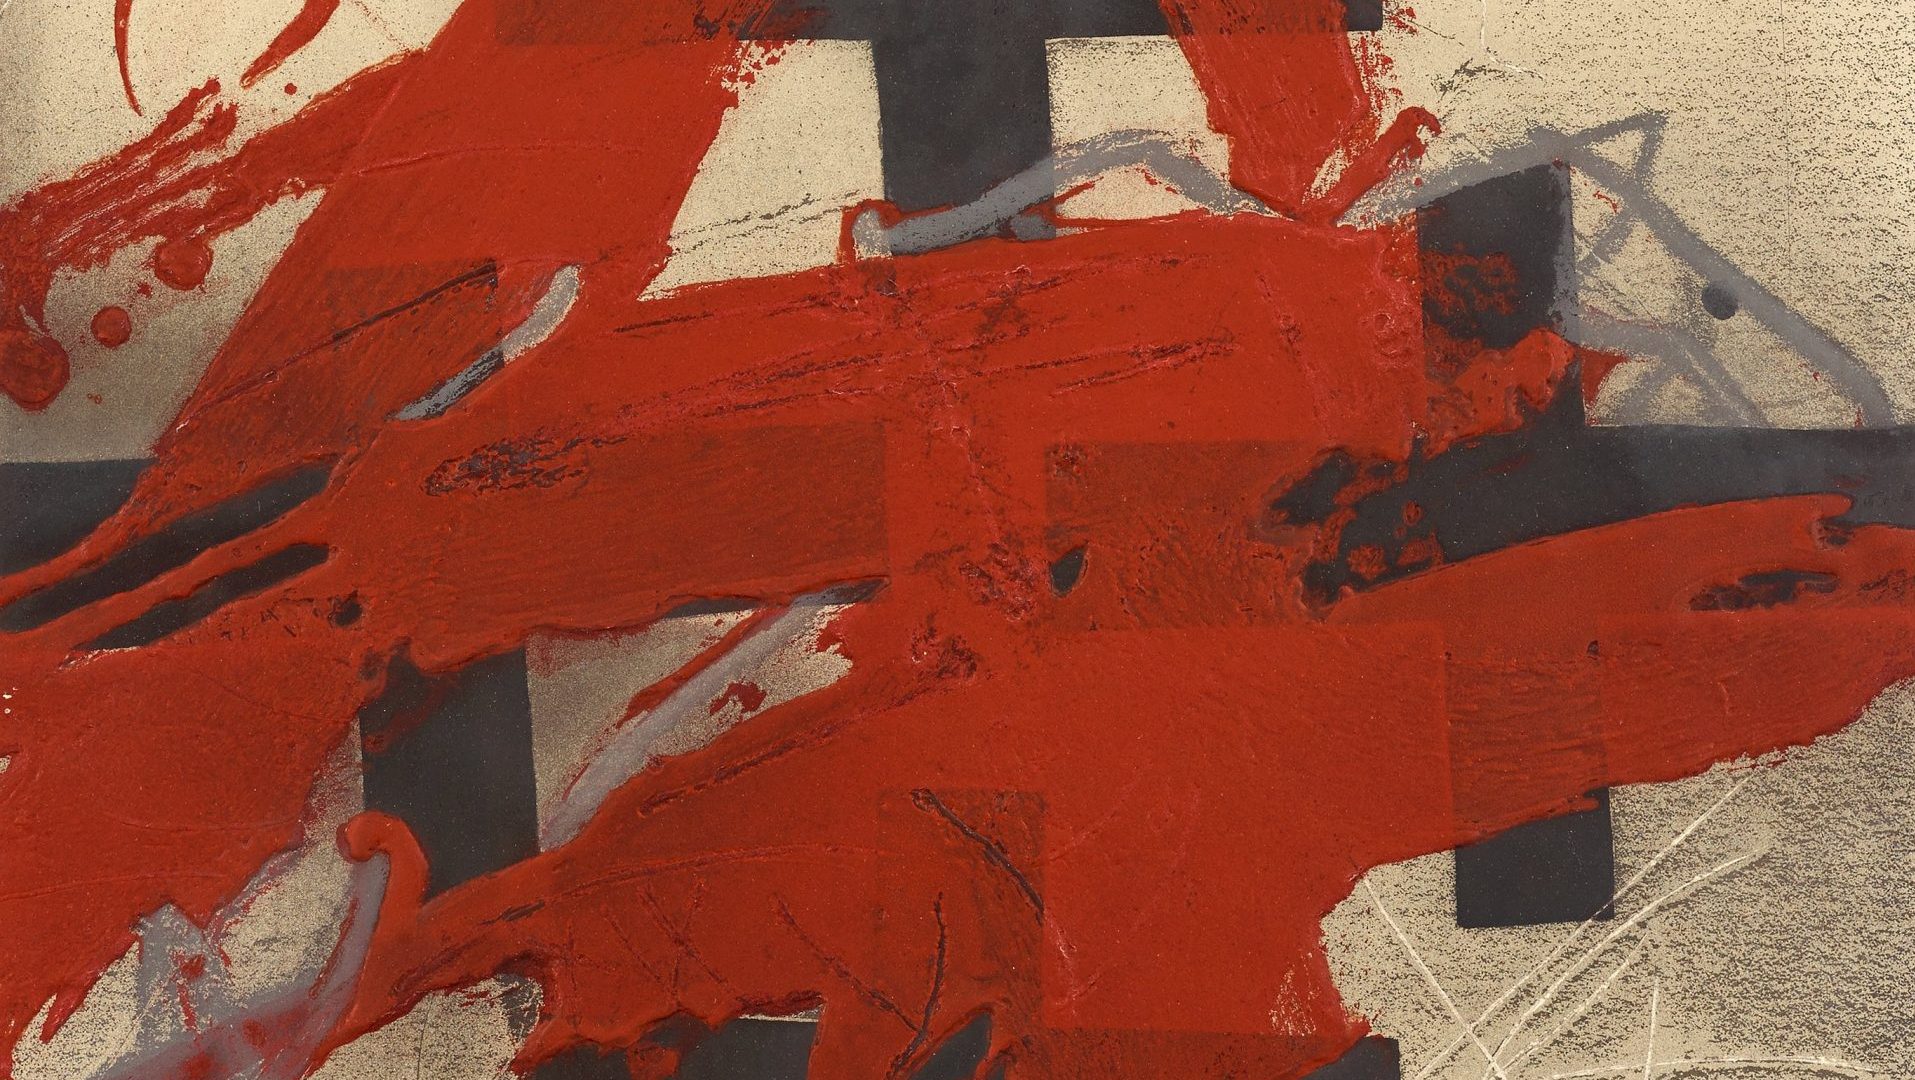 Opposite page: Antoni Tàpies’ Cobert de roig (Covered with red), etching in colours, with relief and grattage, 1984. Photo: Fundació 
Antoni Tàpies